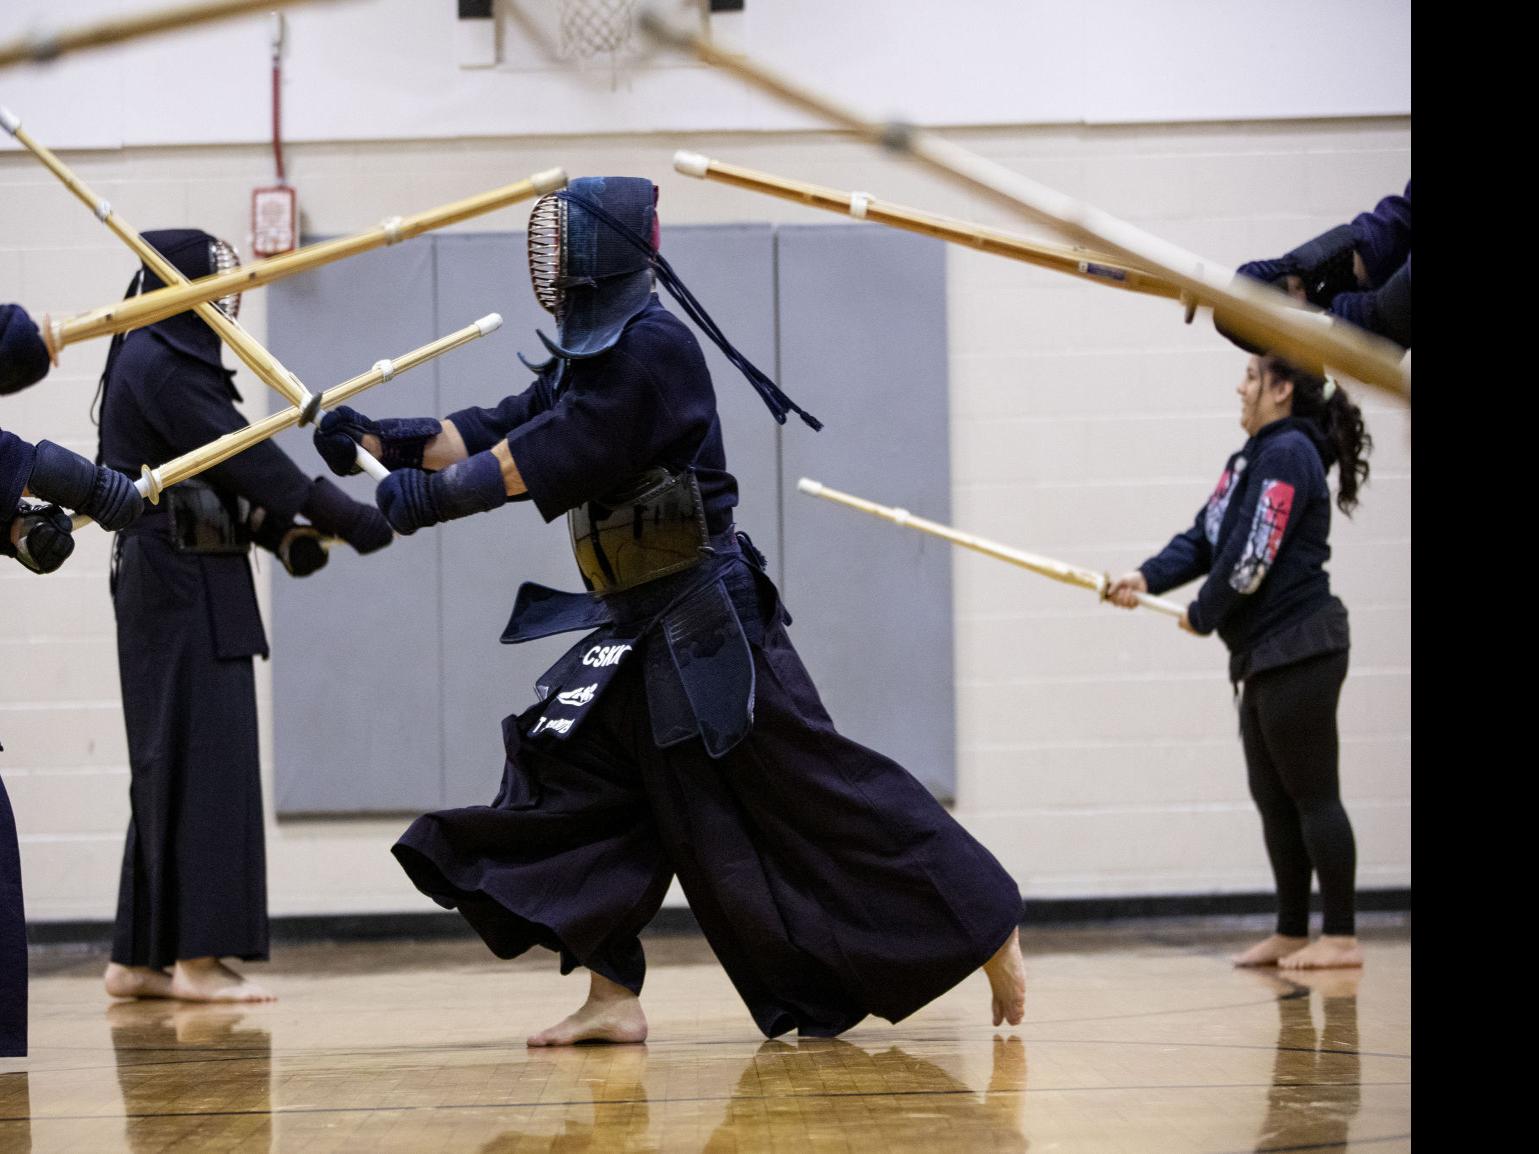 Coming soon: Martial artists competing at full force in high-tech armor